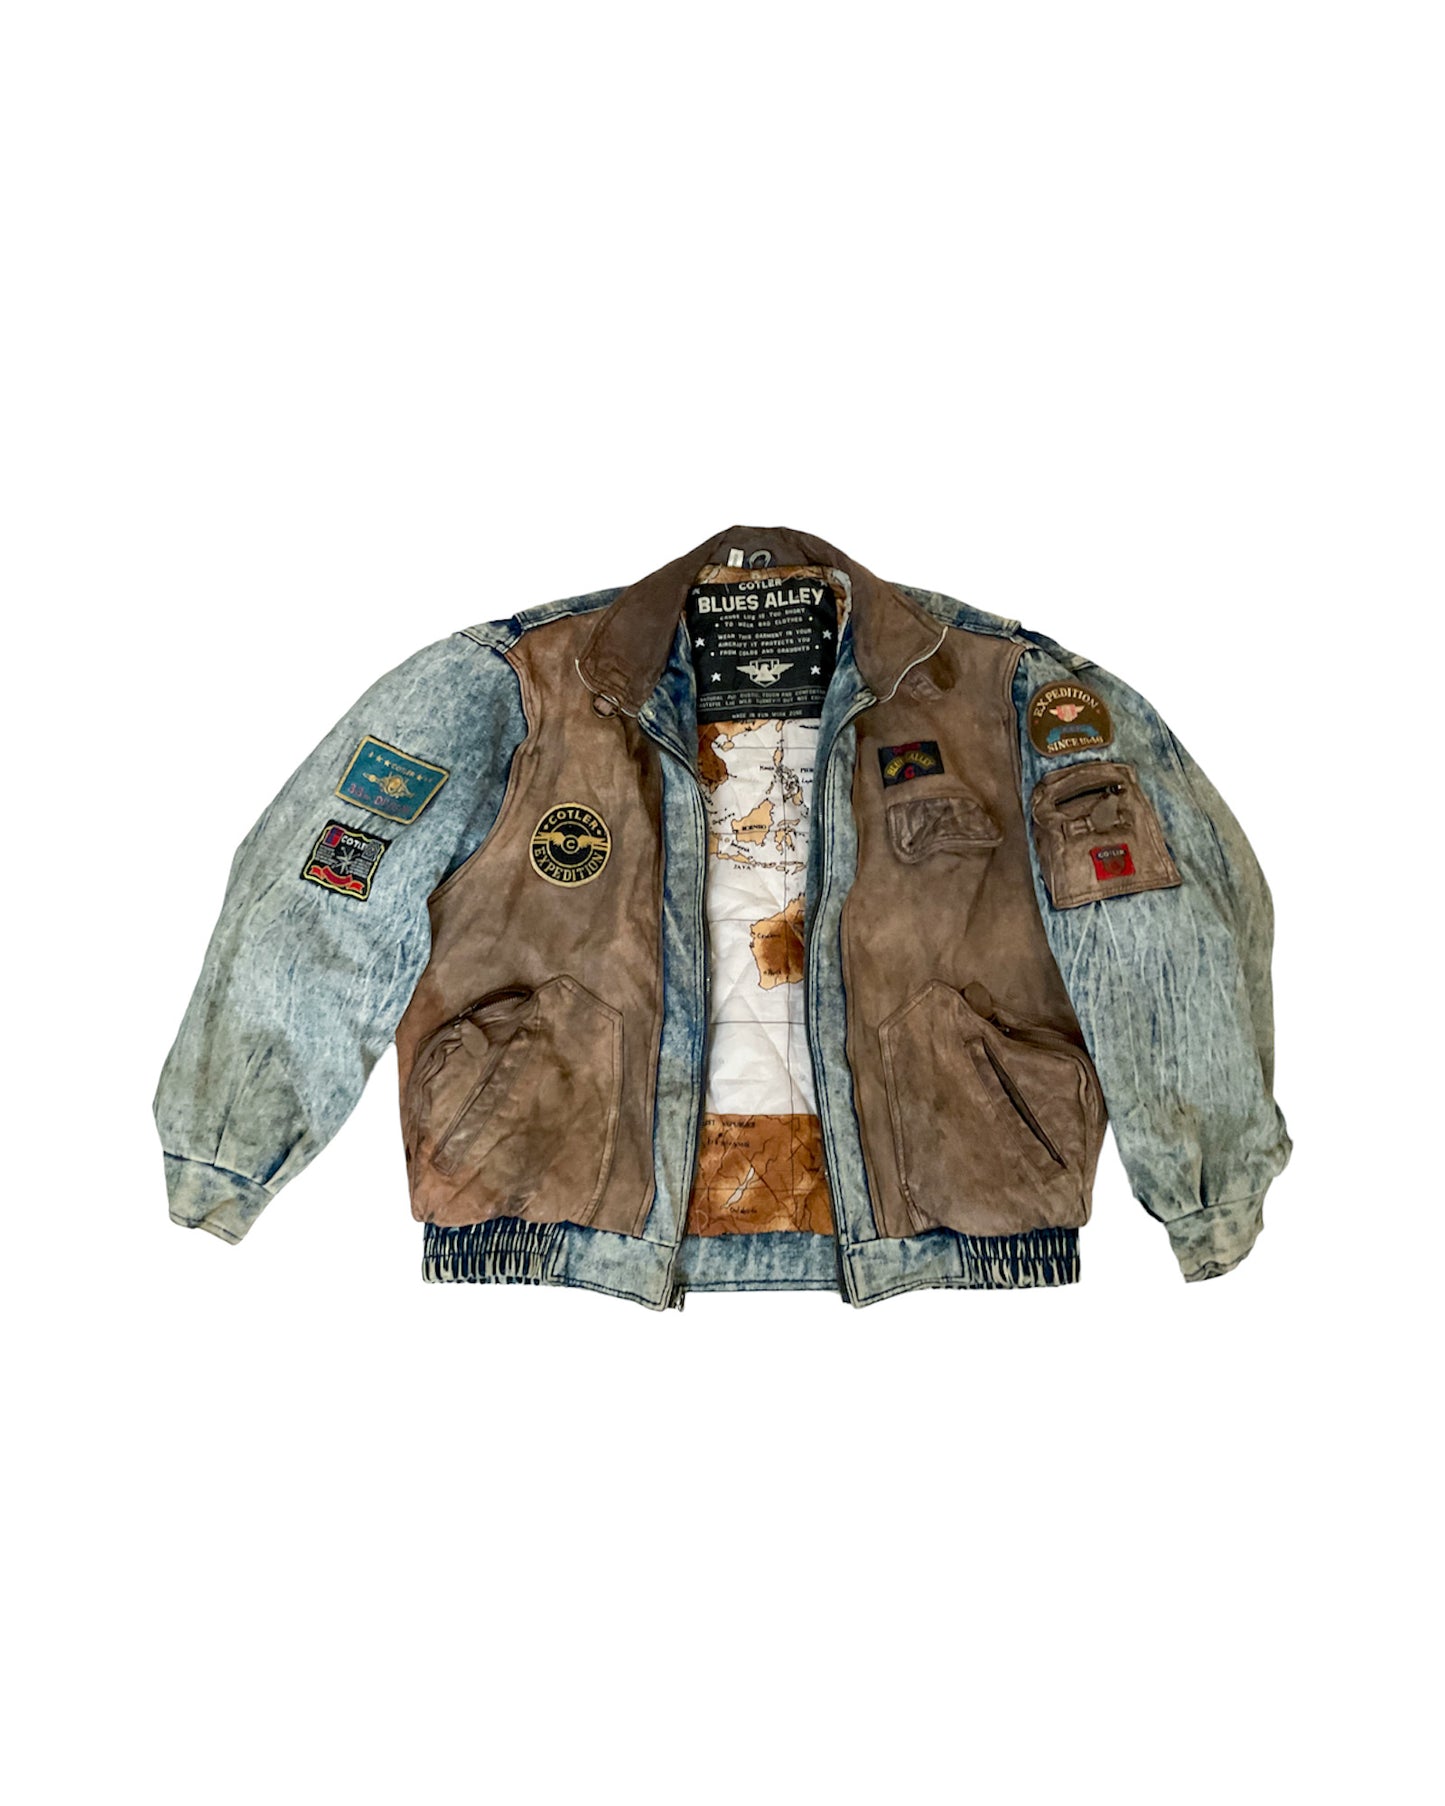 Vintage Road trip Denim and Leather Patch Jacket